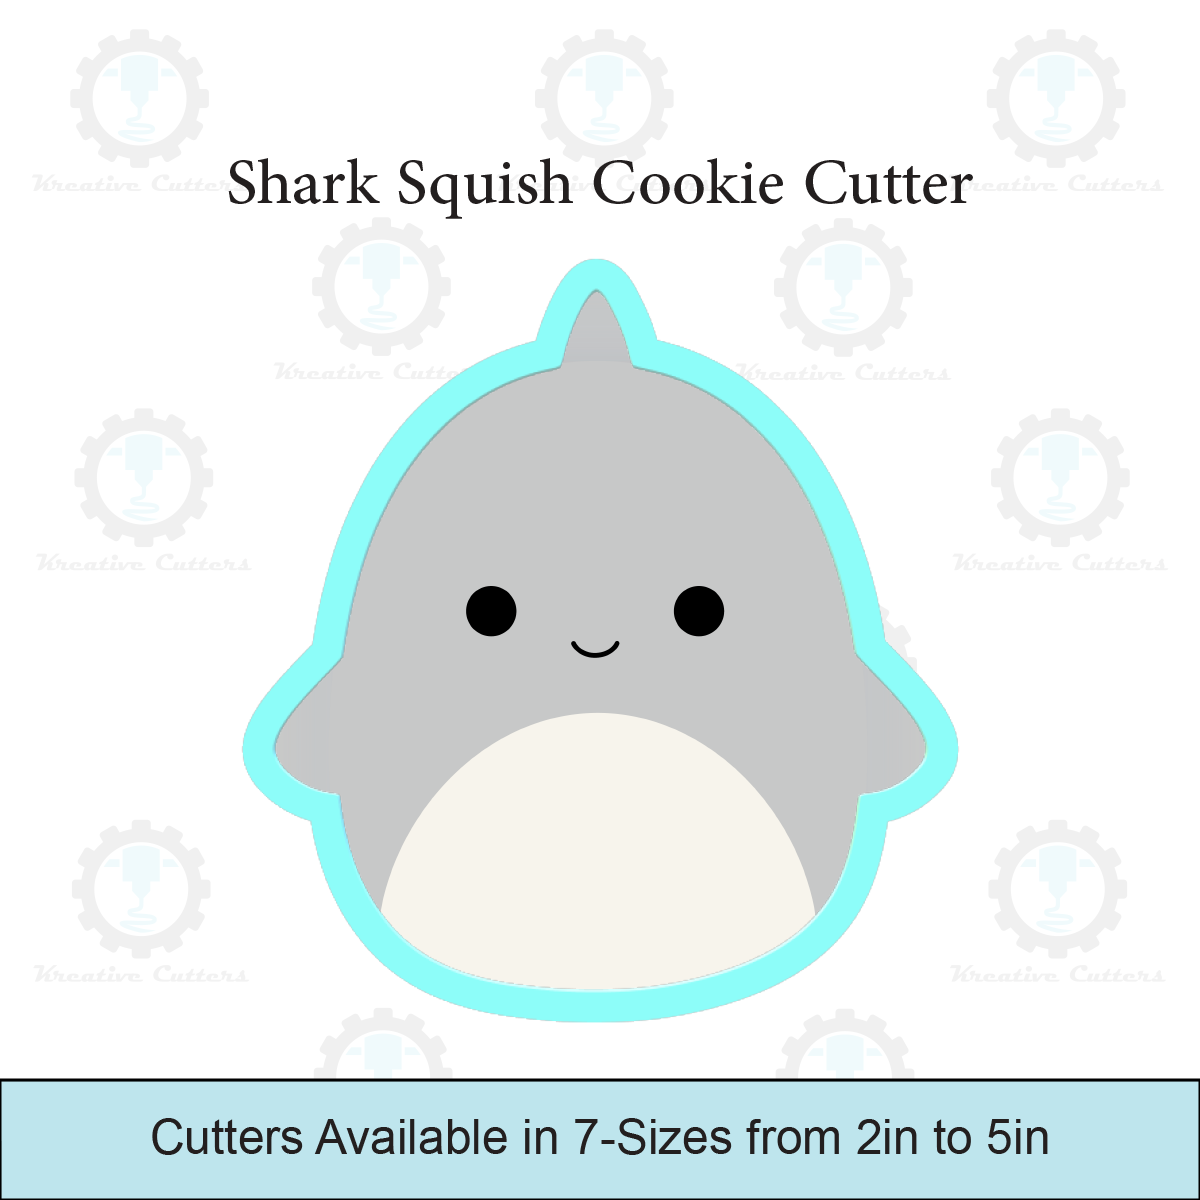 Shark Squish Cookie Cutters